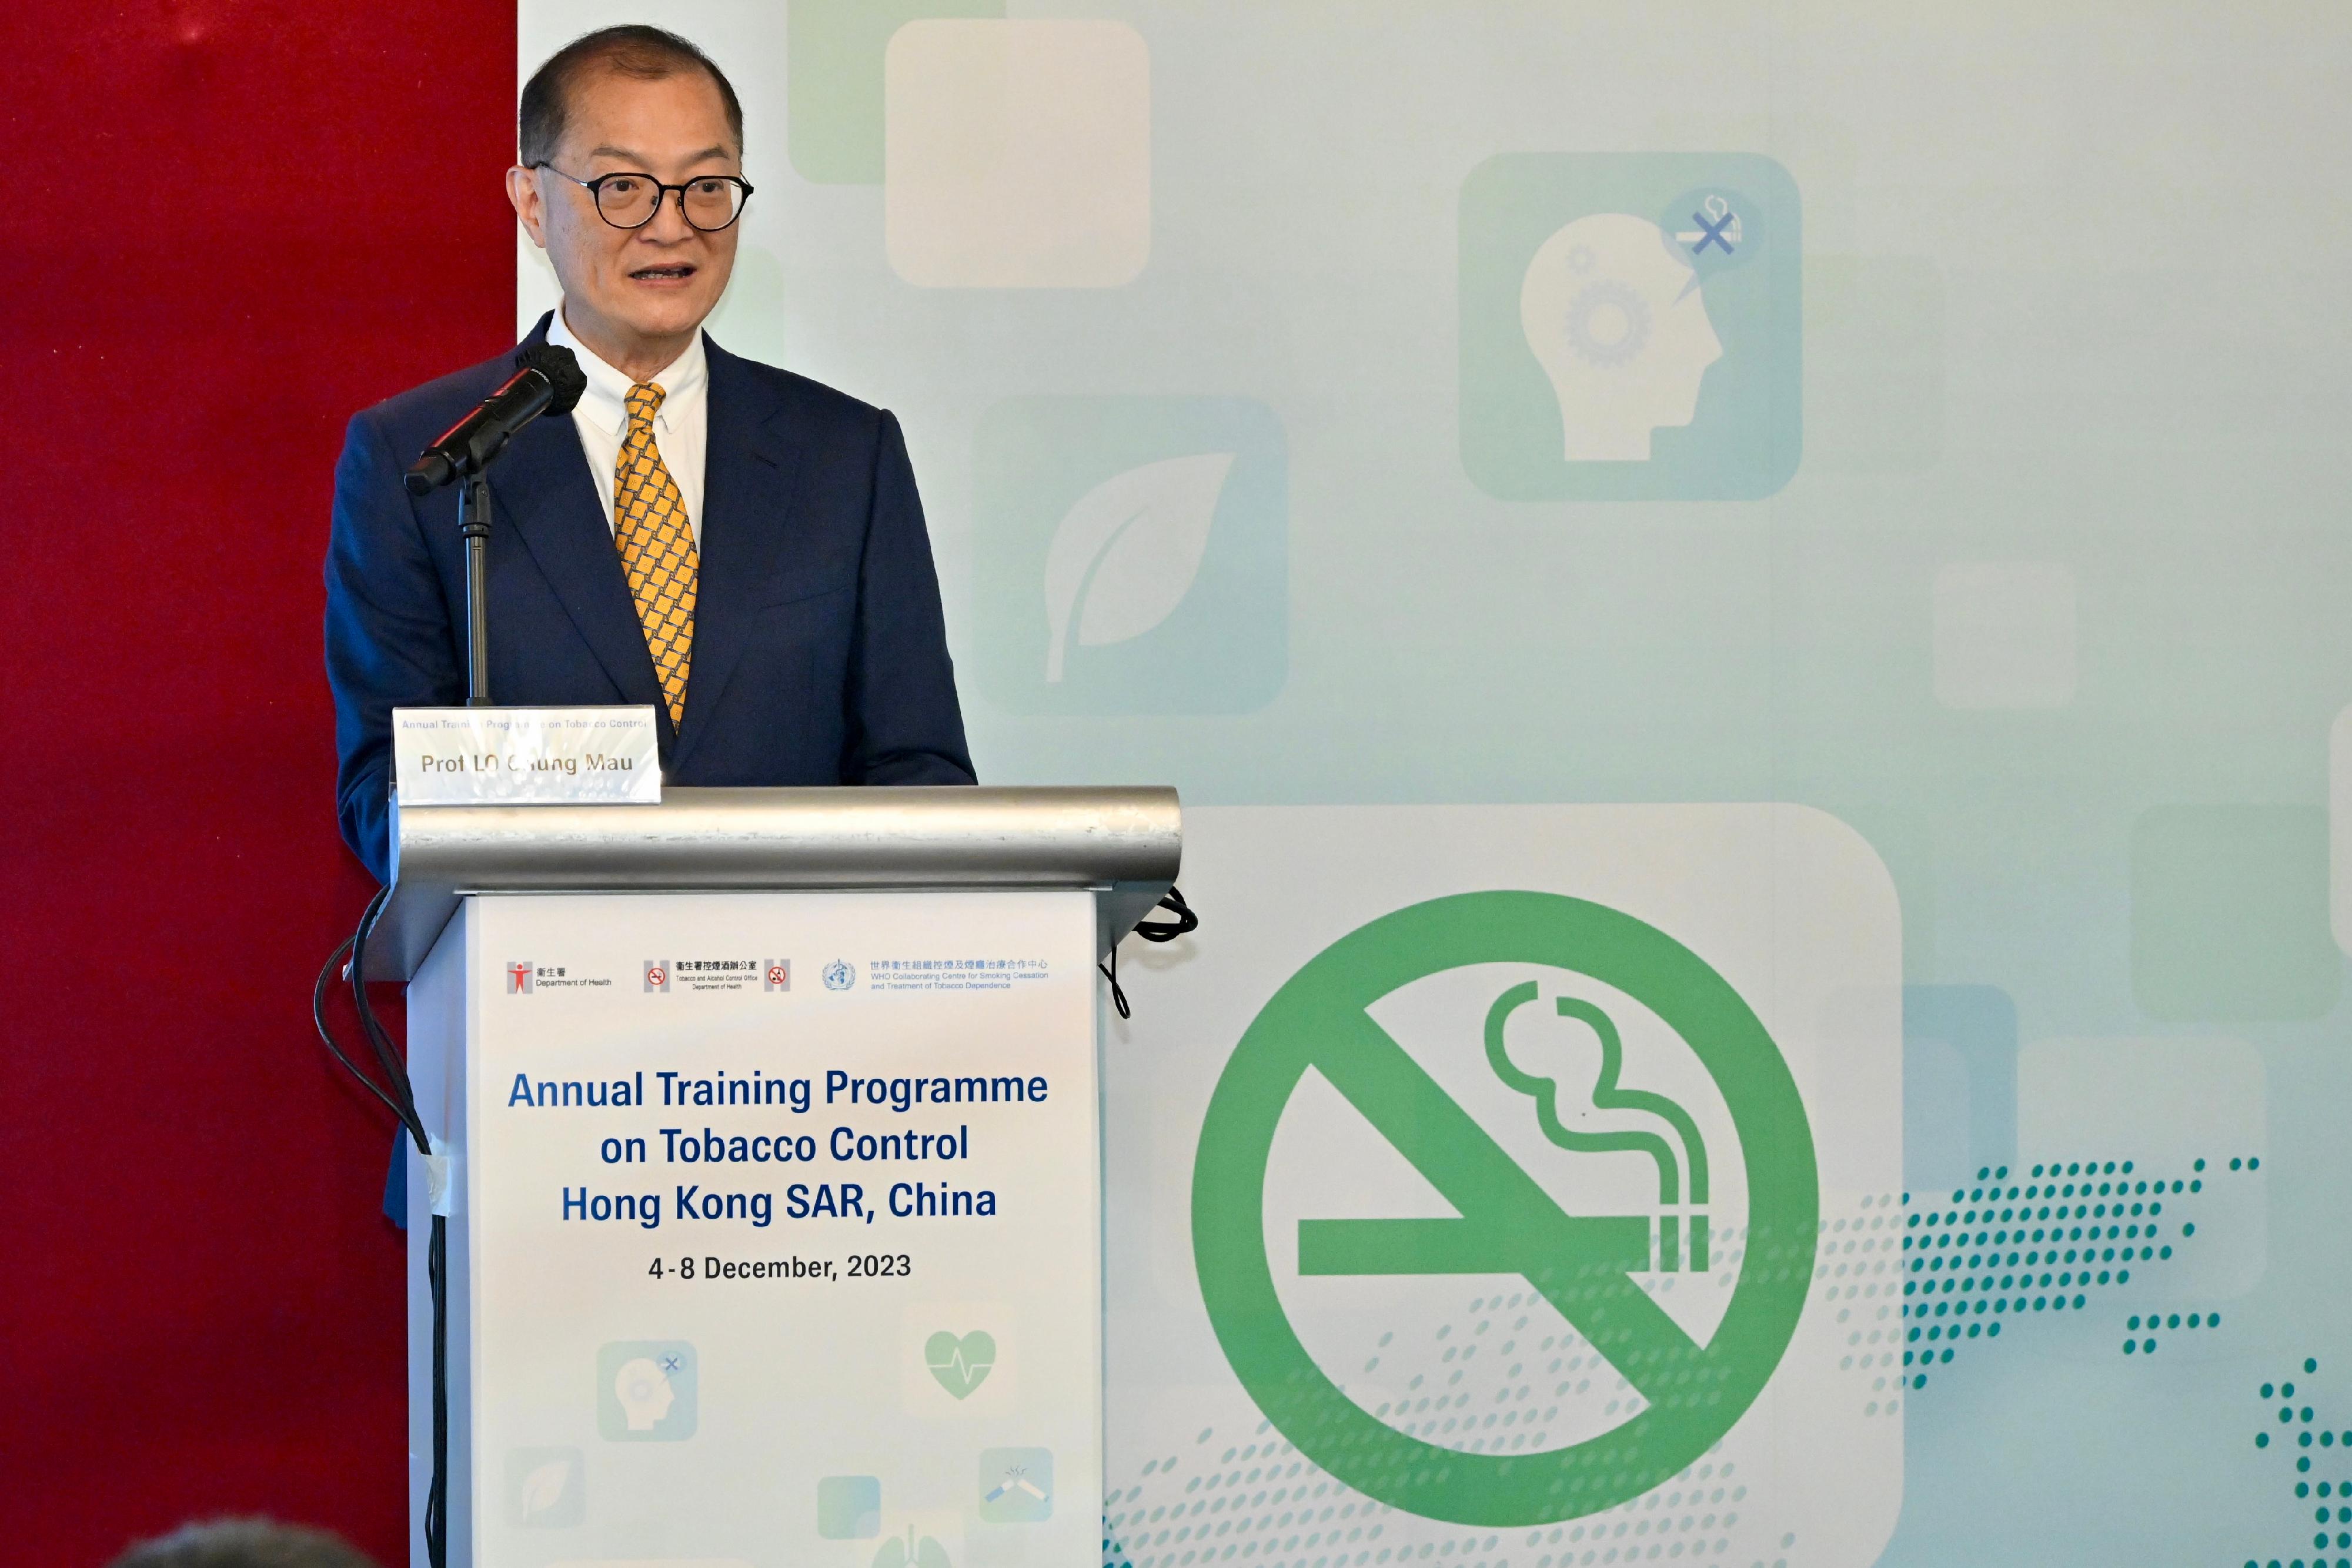 The Secretary for Health, Professor Lo Chung-mau, delivers a speech at the closing ceremony of the Annual Training Programme on Tobacco Control 2023 organised by the Tobacco and Alcohol Control Office of the Department of Health this afternoon (December 7).